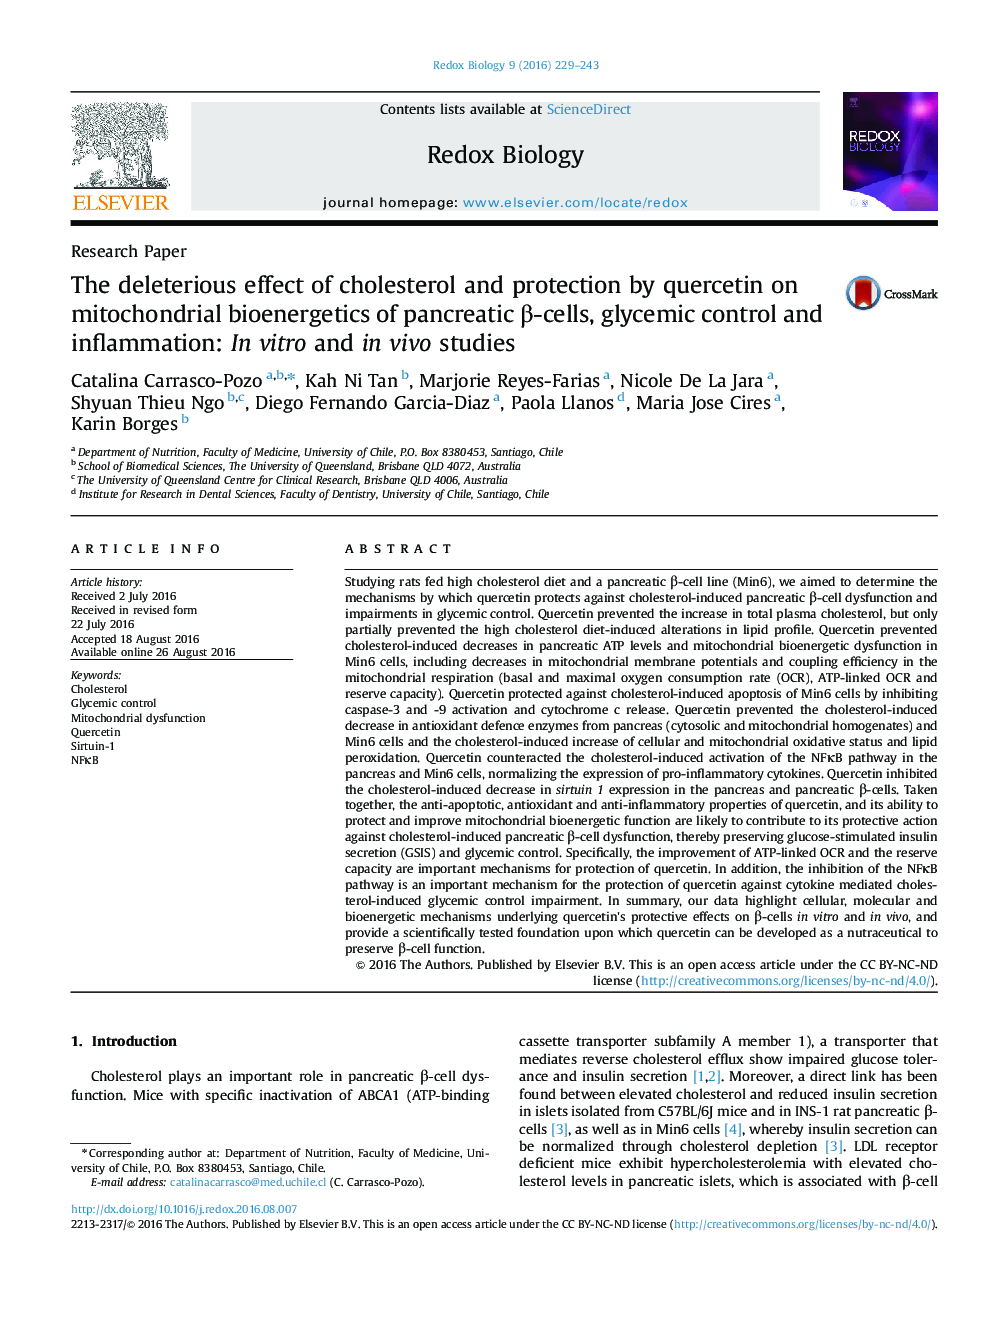 The deleterious effect of cholesterol and protection by quercetin on mitochondrial bioenergetics of pancreatic β-cells, glycemic control and inflammation: In vitro and in vivo studies